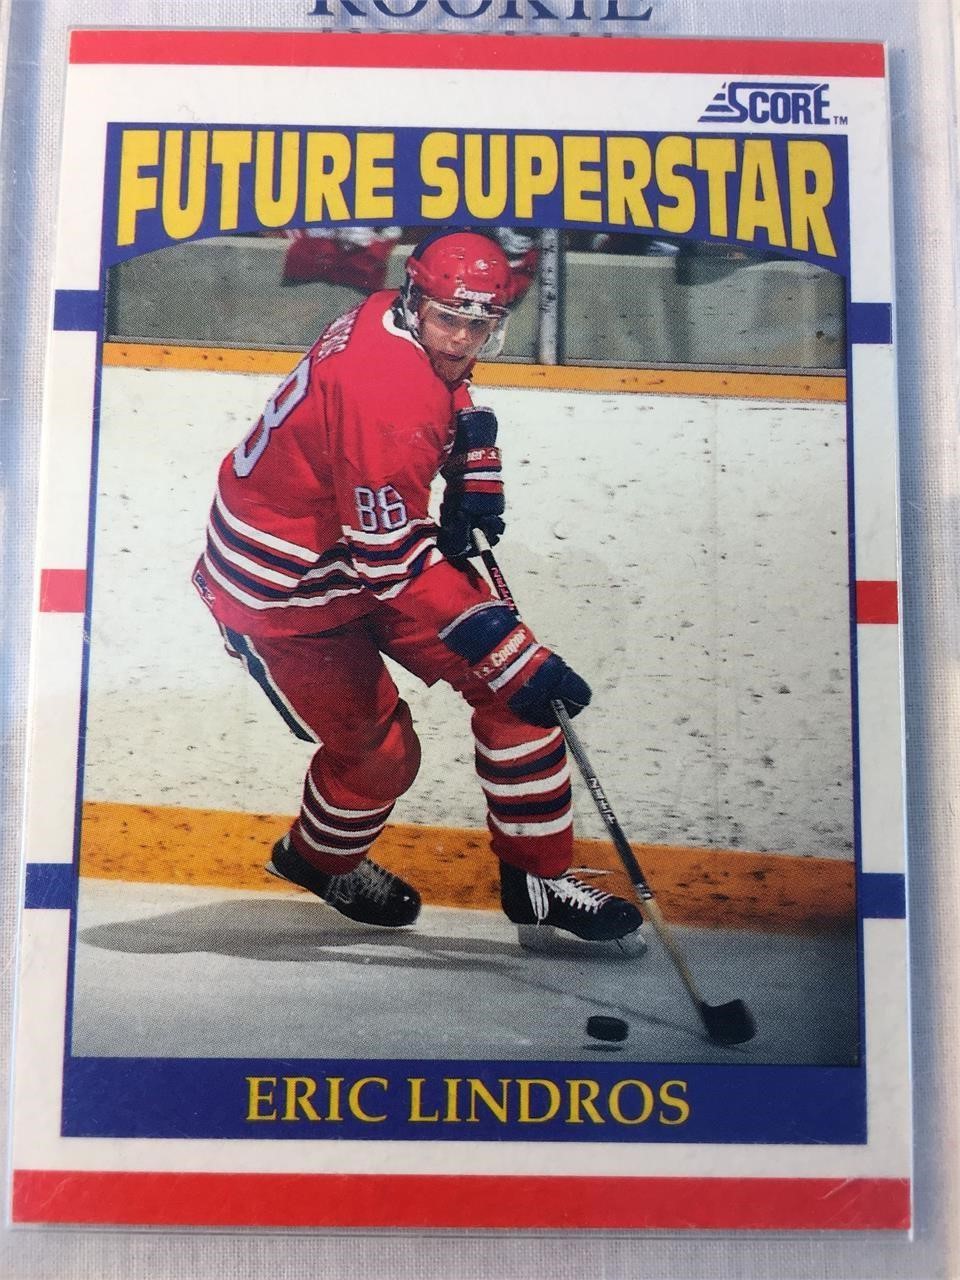 1990 Score Eric Lindros Rookie Card #440